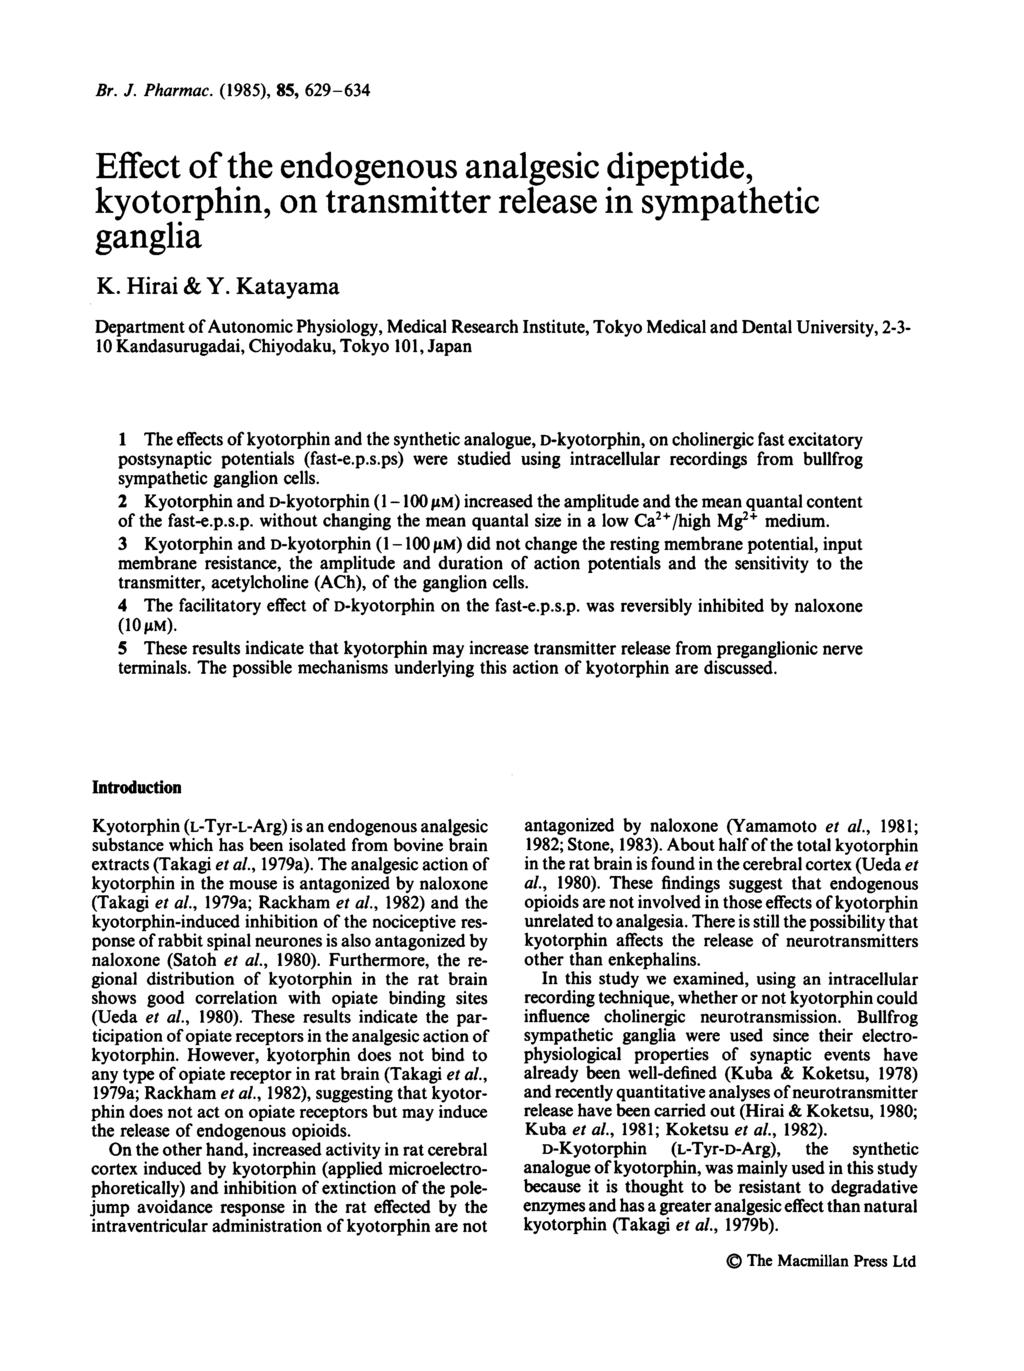 Br. J. Pharmac. (1985), 85, 629-634 Effect of the endogenous analgesic dipeptide, kyotorphin, on transmitter release in sympathetic ganglia K. Hirai & Y.